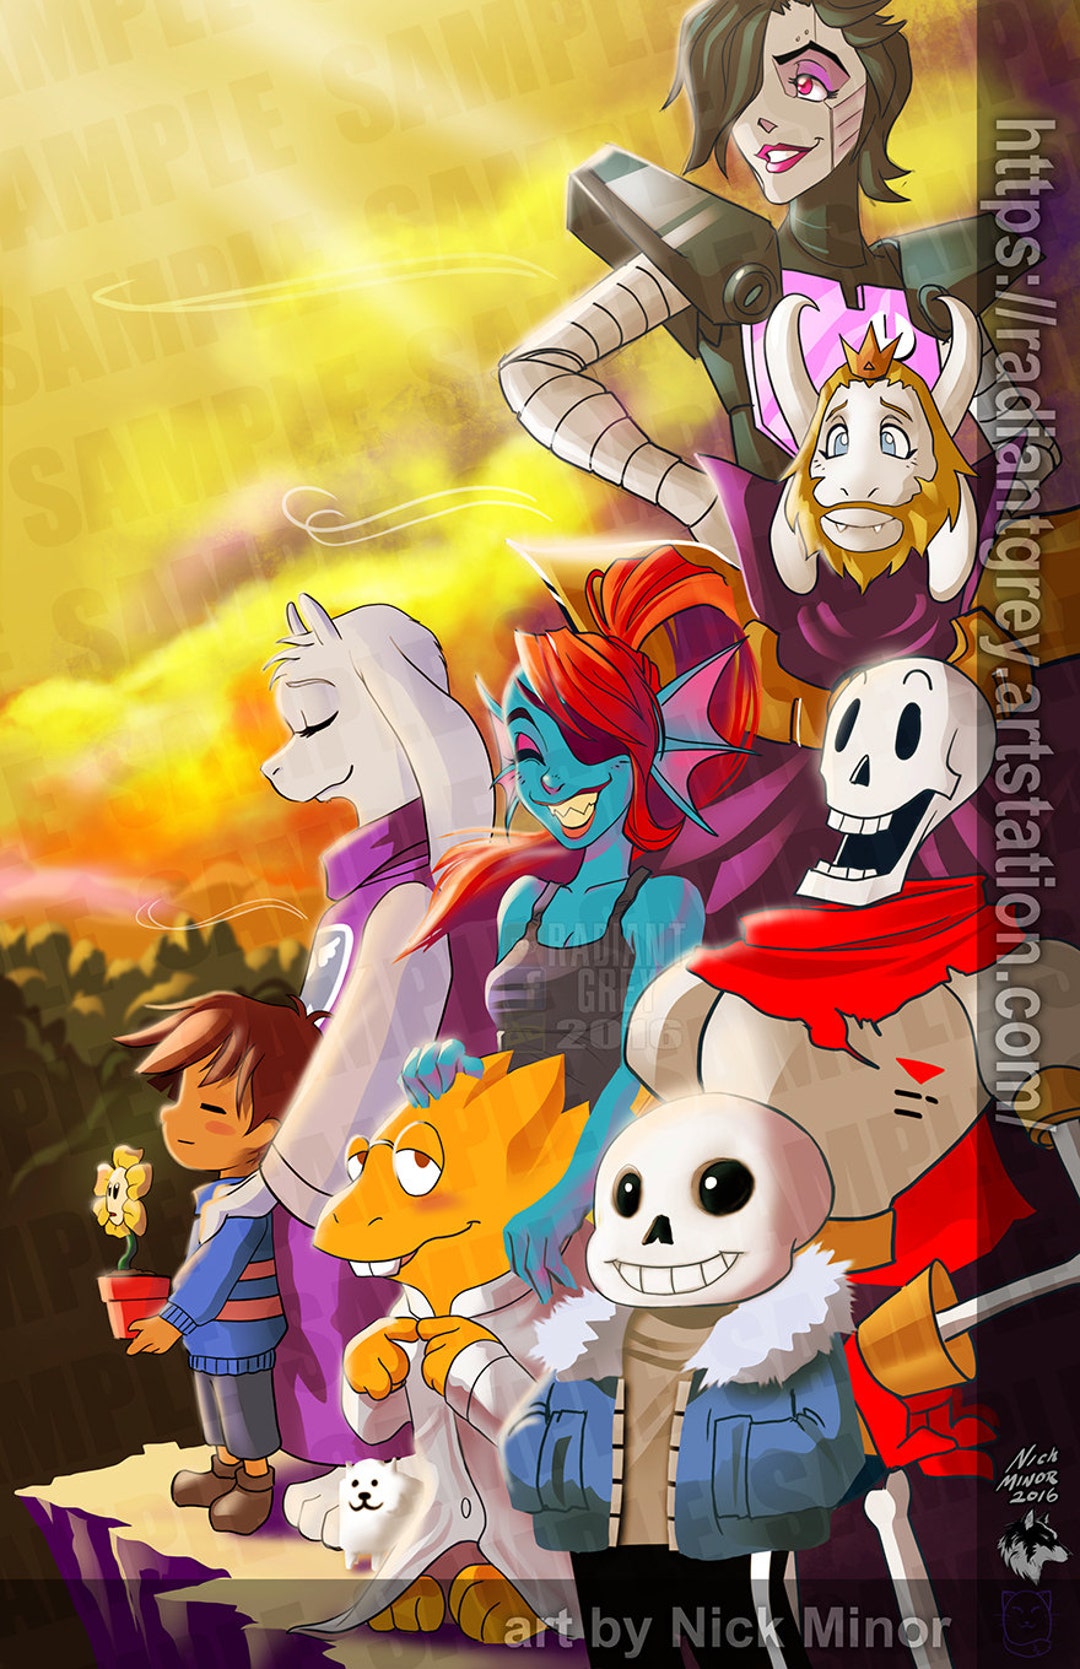 Undertale Poster PC Video Game Poster Canvas Prints Teen Dorm Bedroom  Cartoon Poster Wall Art For Home Office Living Room Decorations Unframed  36x20 : : Home